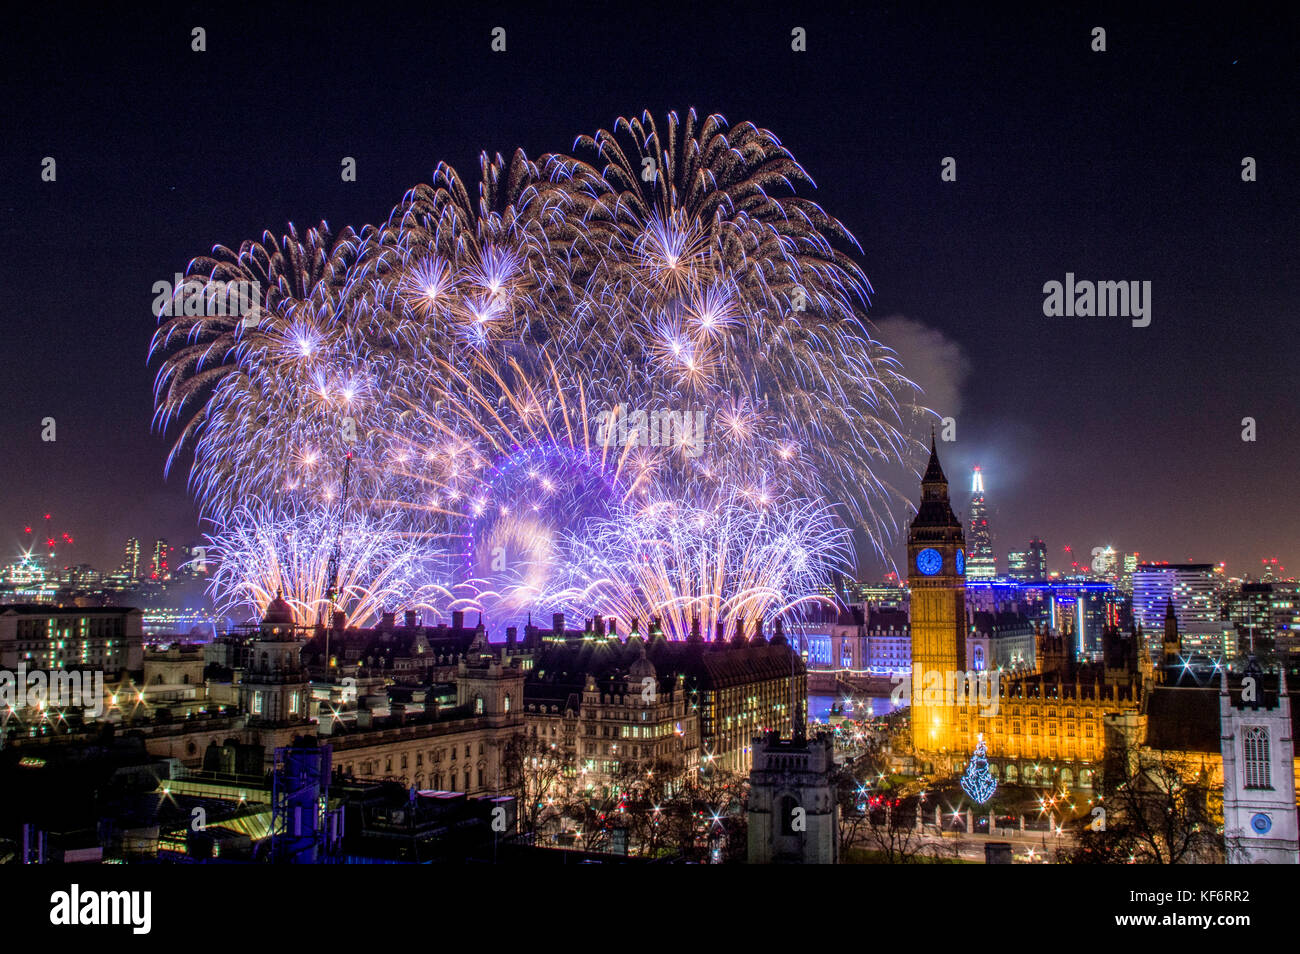 The mayor of londons New Year Fireworks display Stock Photo